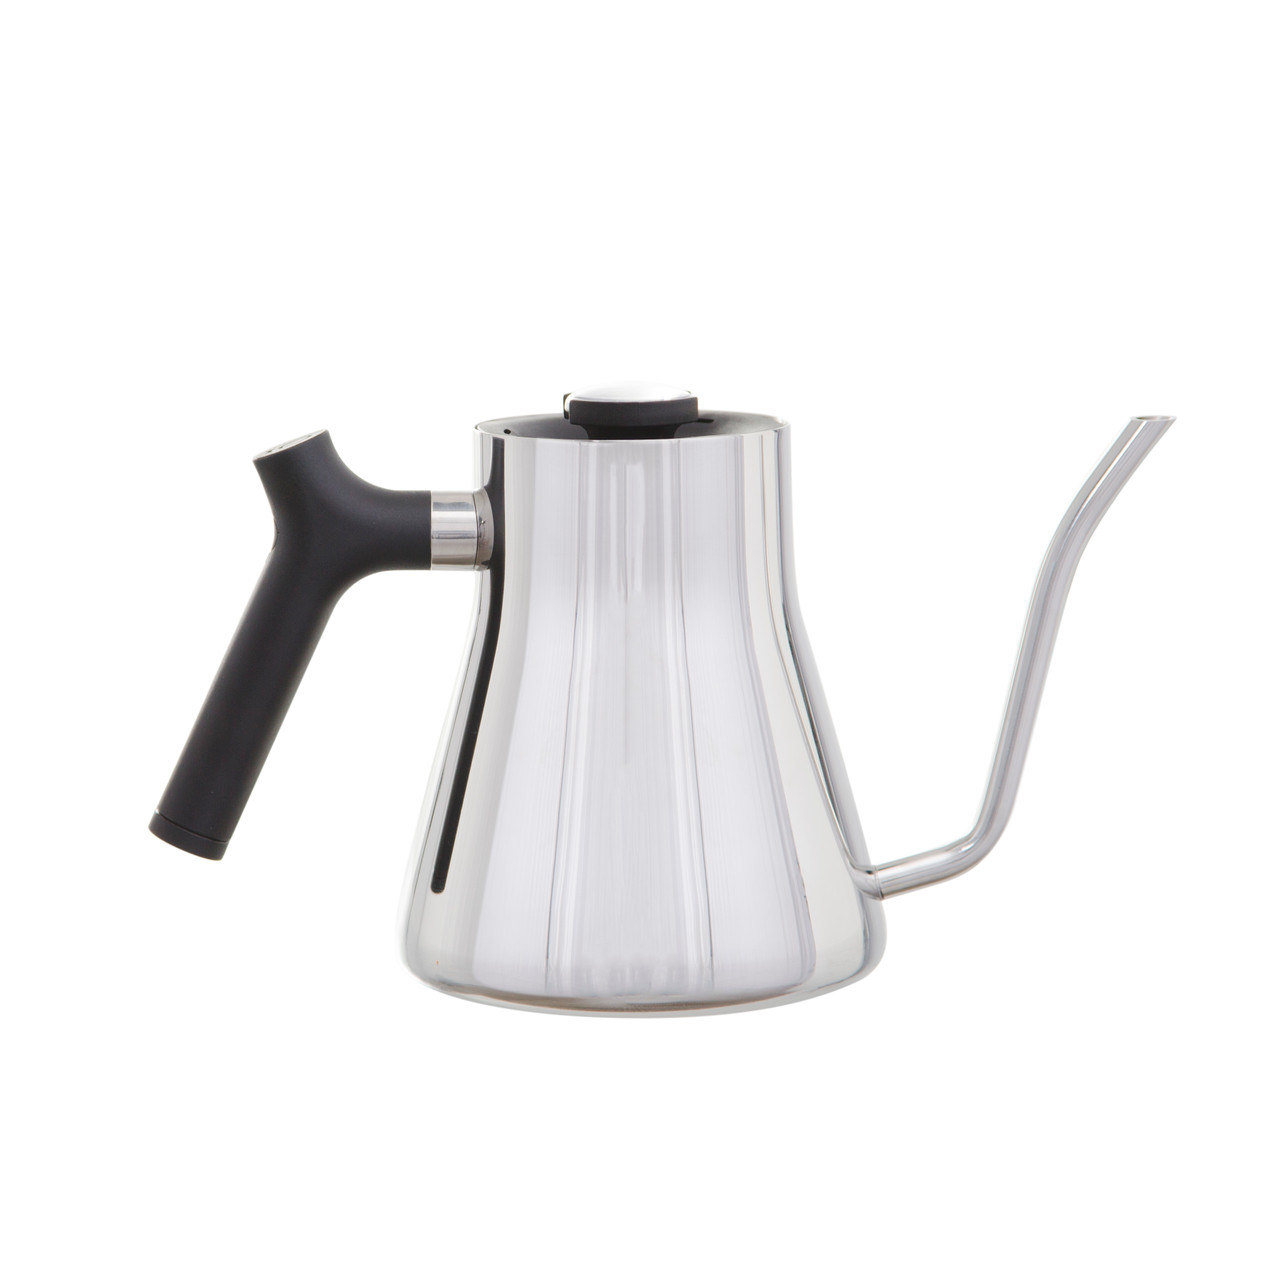 Breville 57 Oz Temp Select Electric Kettle in Brushed Stainless